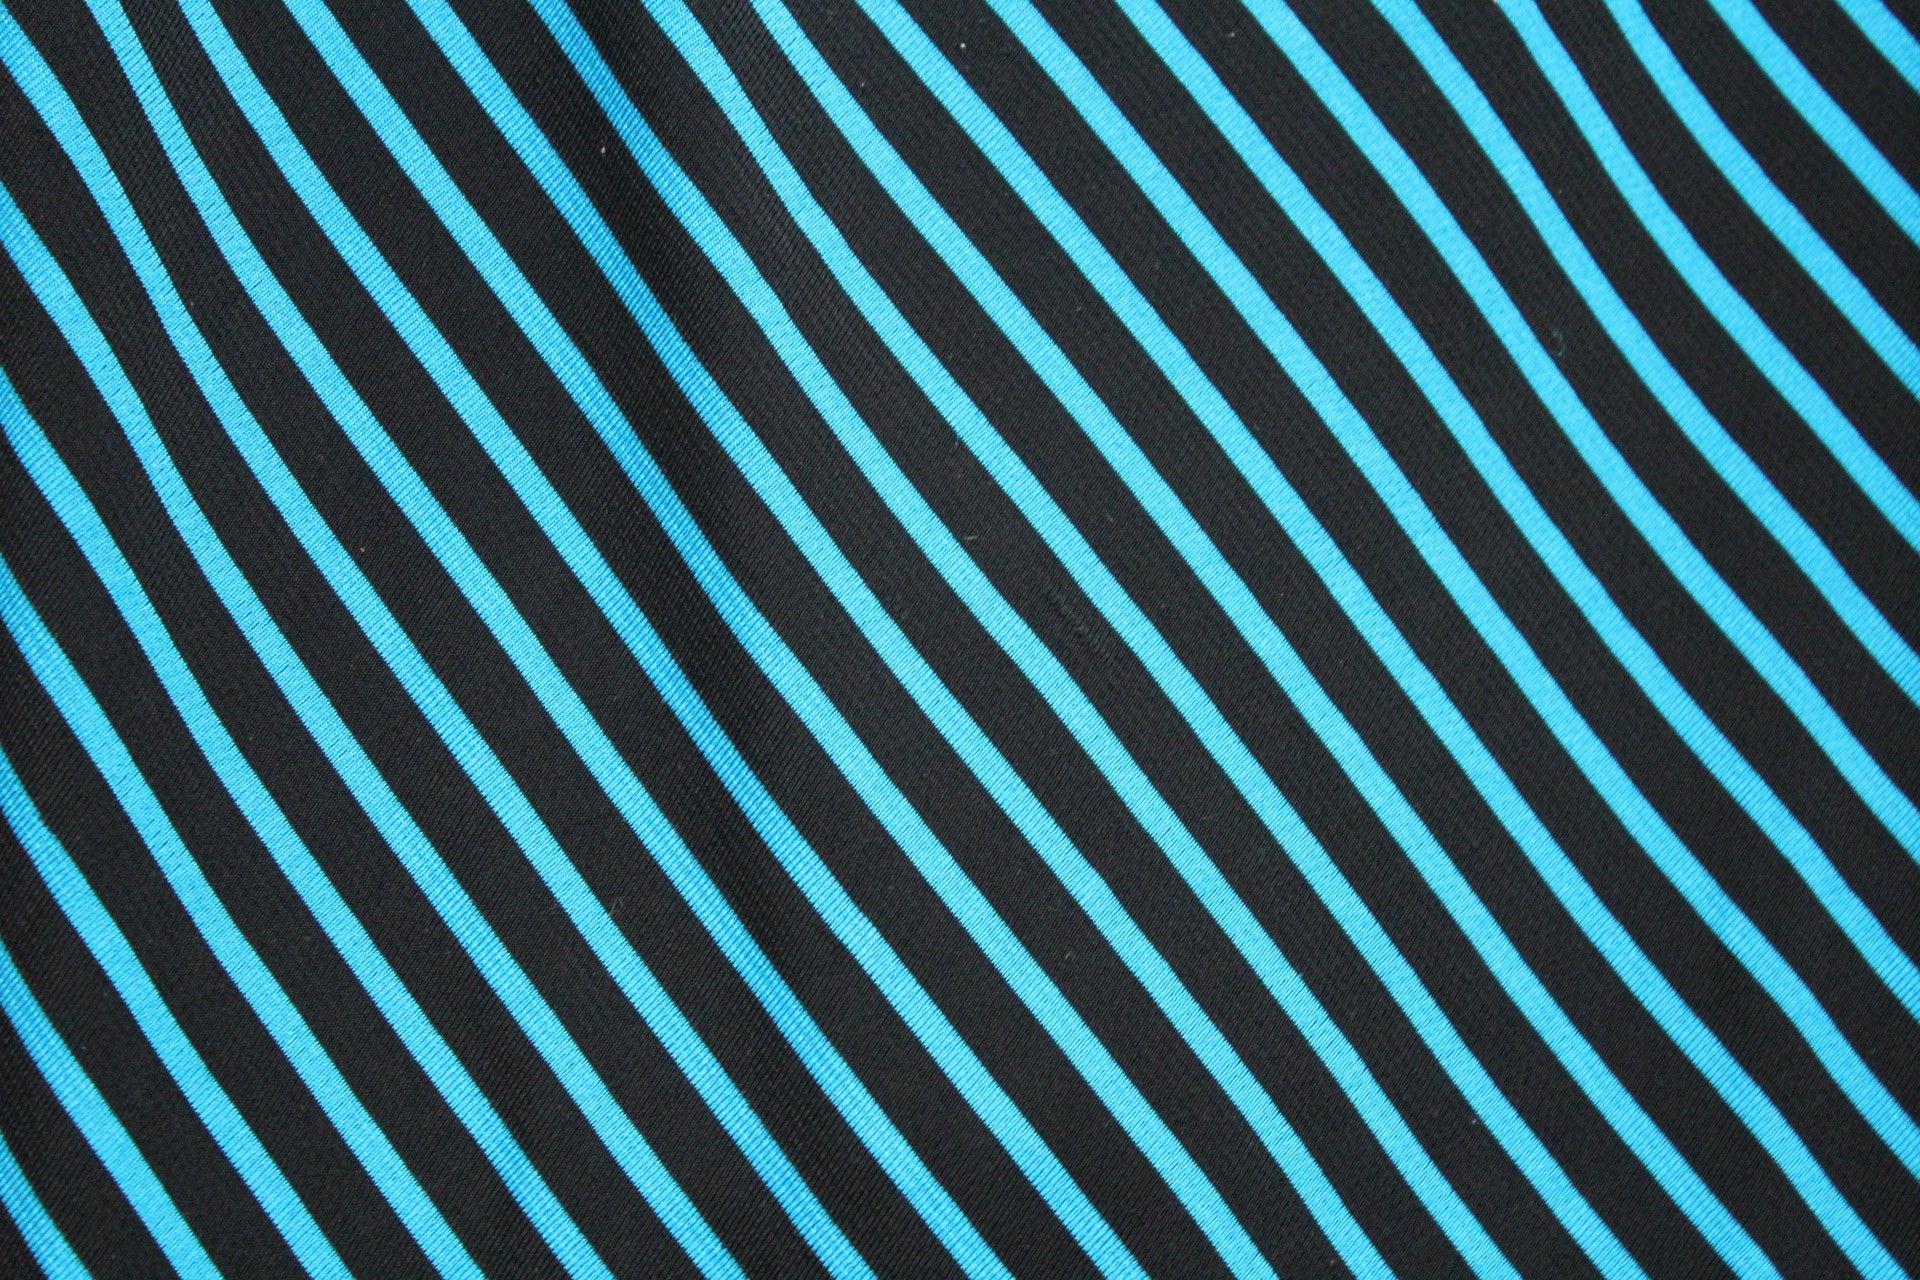 Stripe background ·① Download free cool wallpapers for desktop and mobile devices in any ...